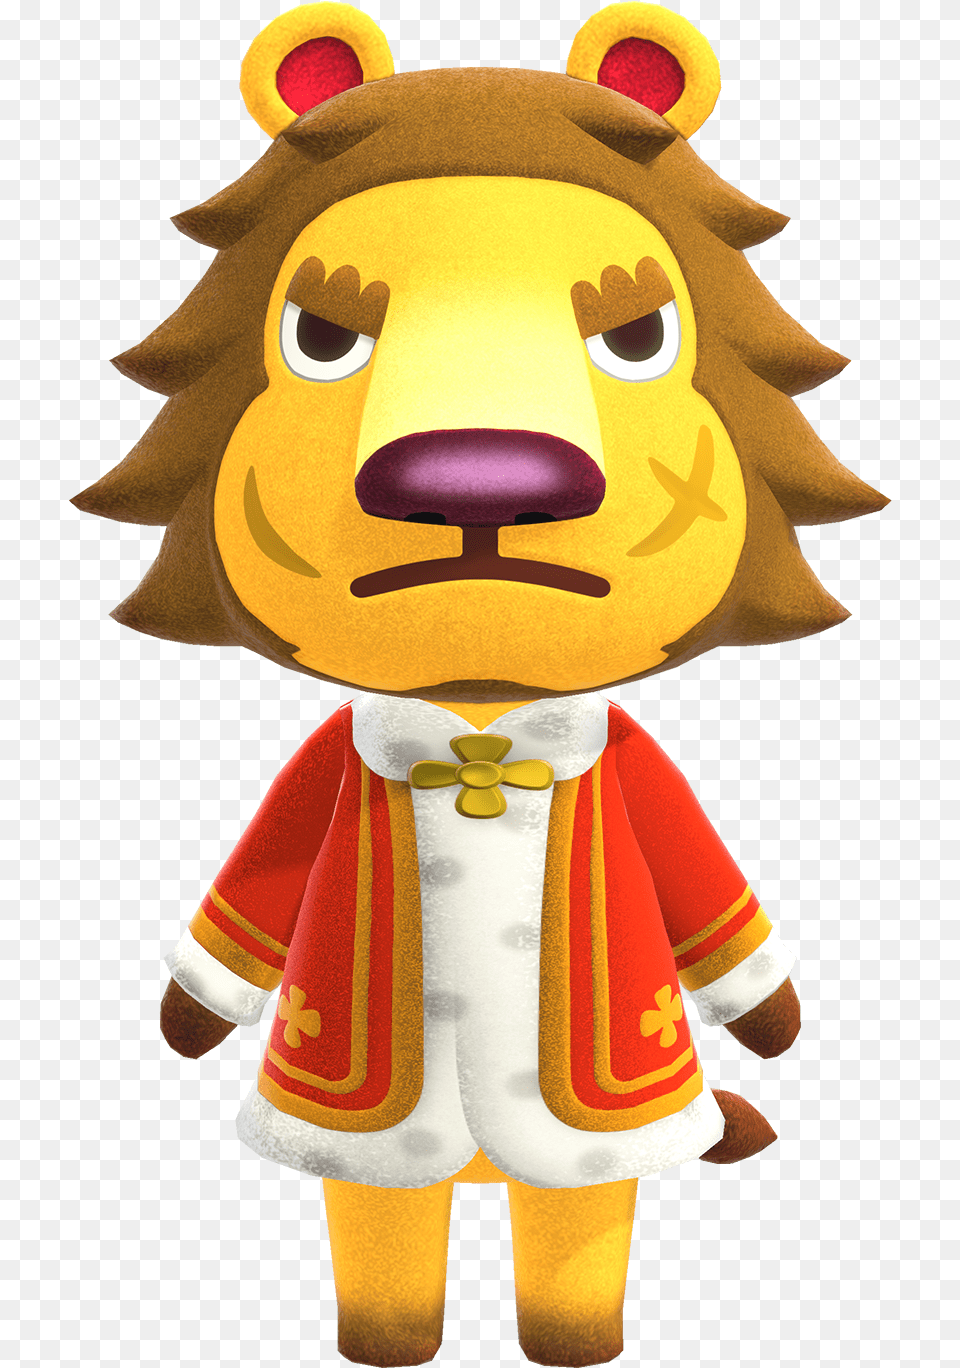 Elvis Animal Crossing Wiki Nookipedia Animal Crossing Villagers Rex, Plush, Toy, Baby, Person Png Image